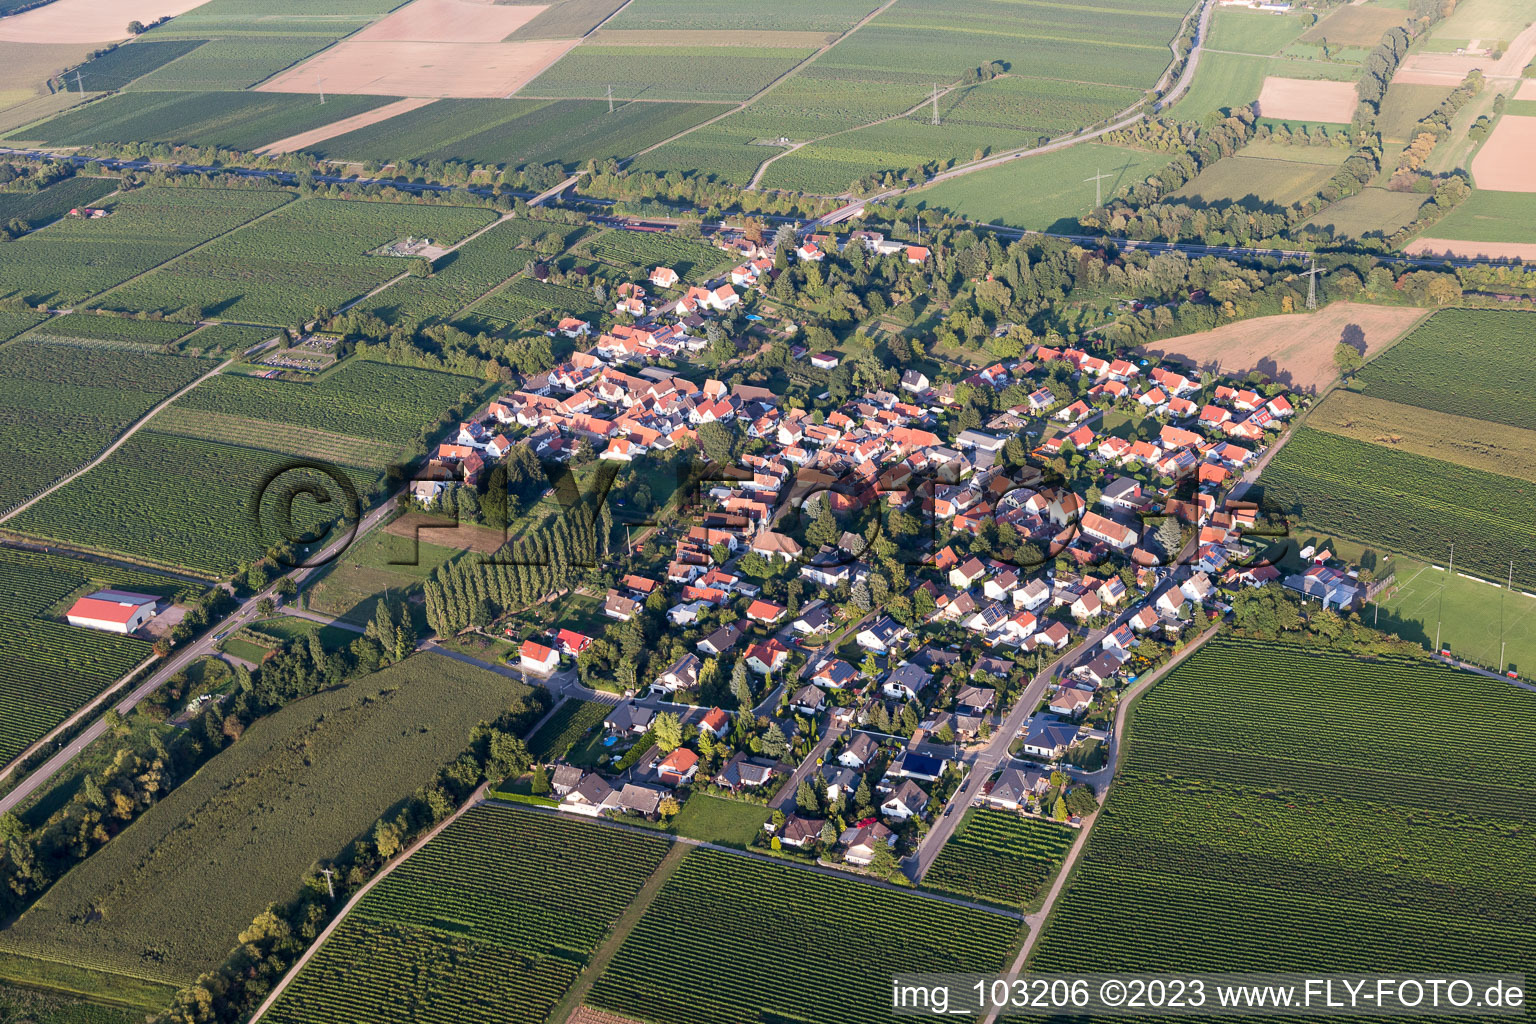 Walsheim in the state Rhineland-Palatinate, Germany viewn from the air